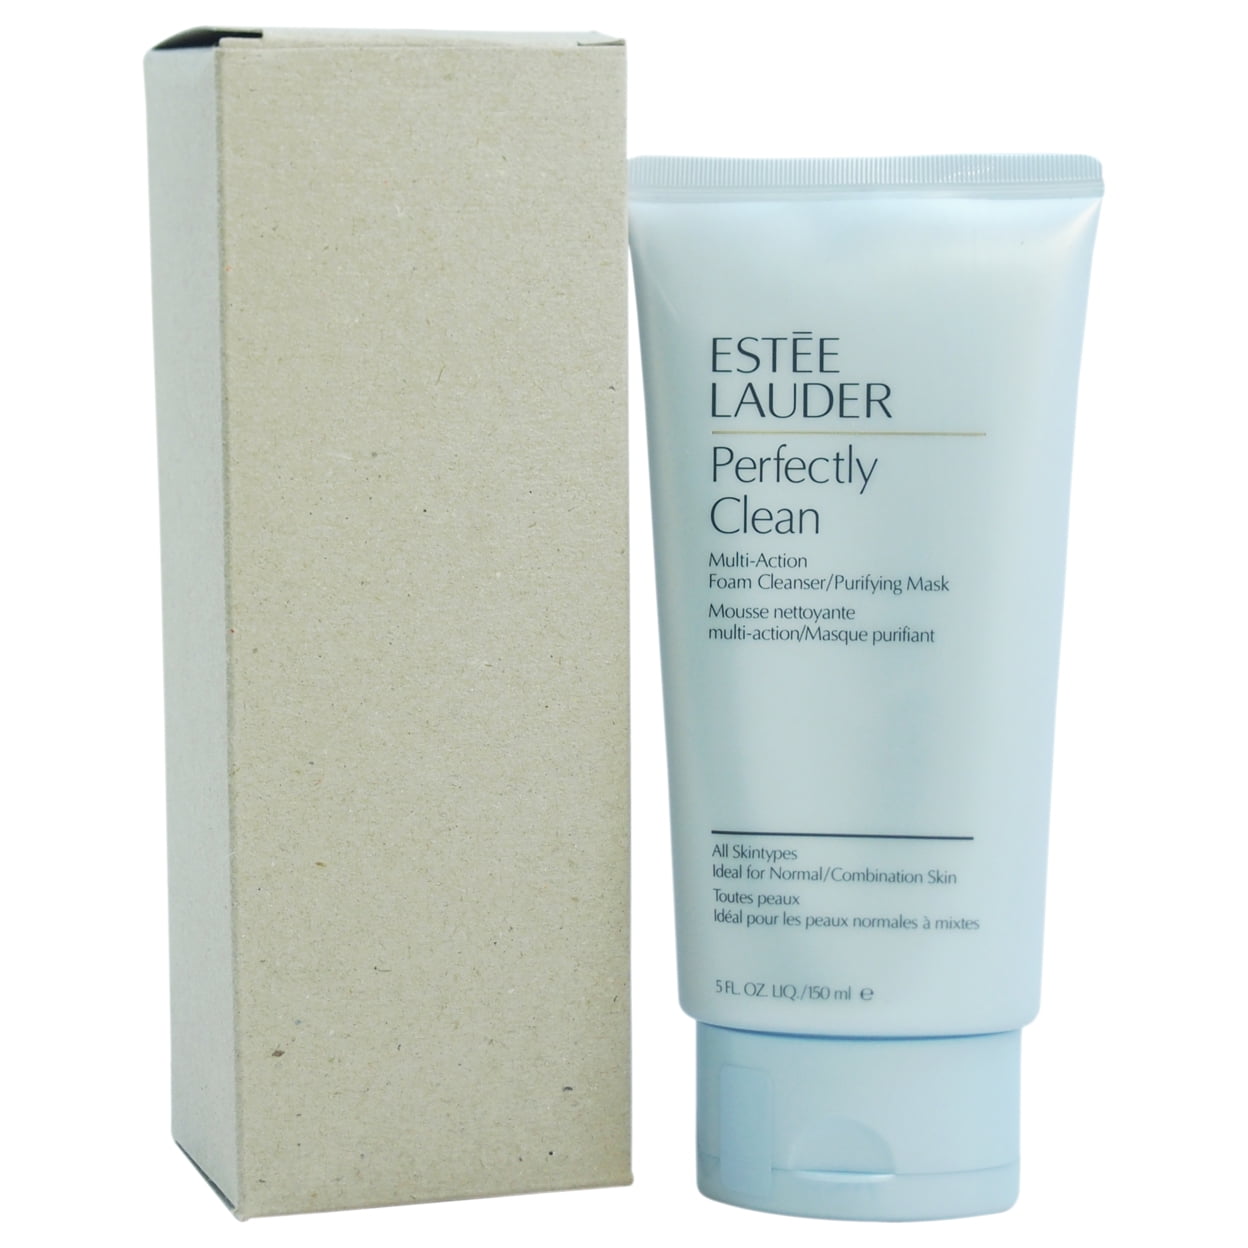 Perfectly Clean Multi-Action Foam Cleanser/Purifying Mask - All Skin Types  by Estee Lauder for Unisex - 5 oz Cleanser